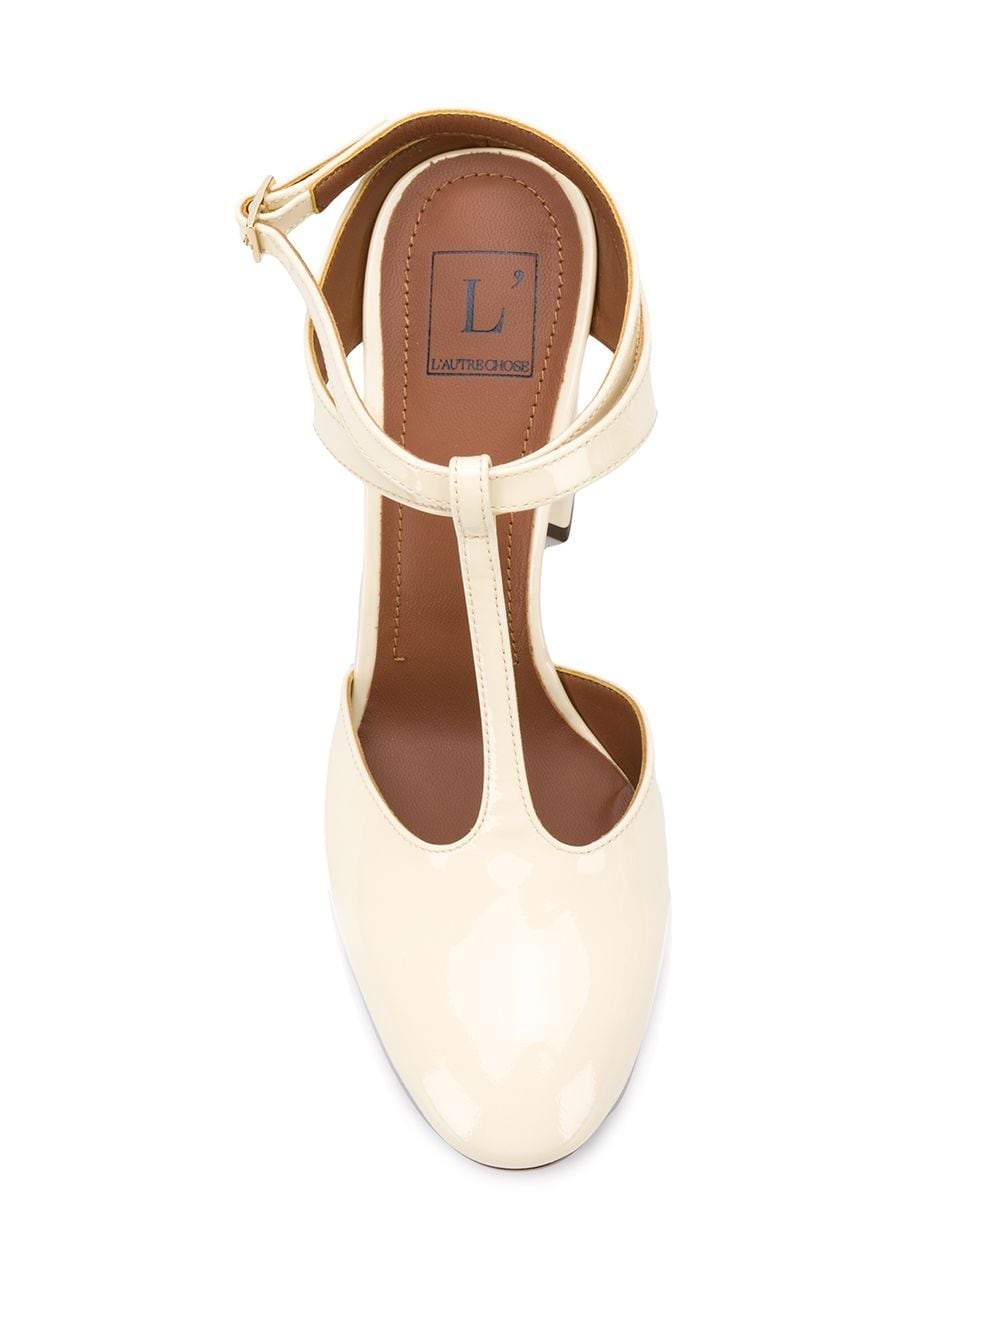 T-Bar Court Shoes In Milk White Patent Leather Heels LDL053.95CP00413044 - 8